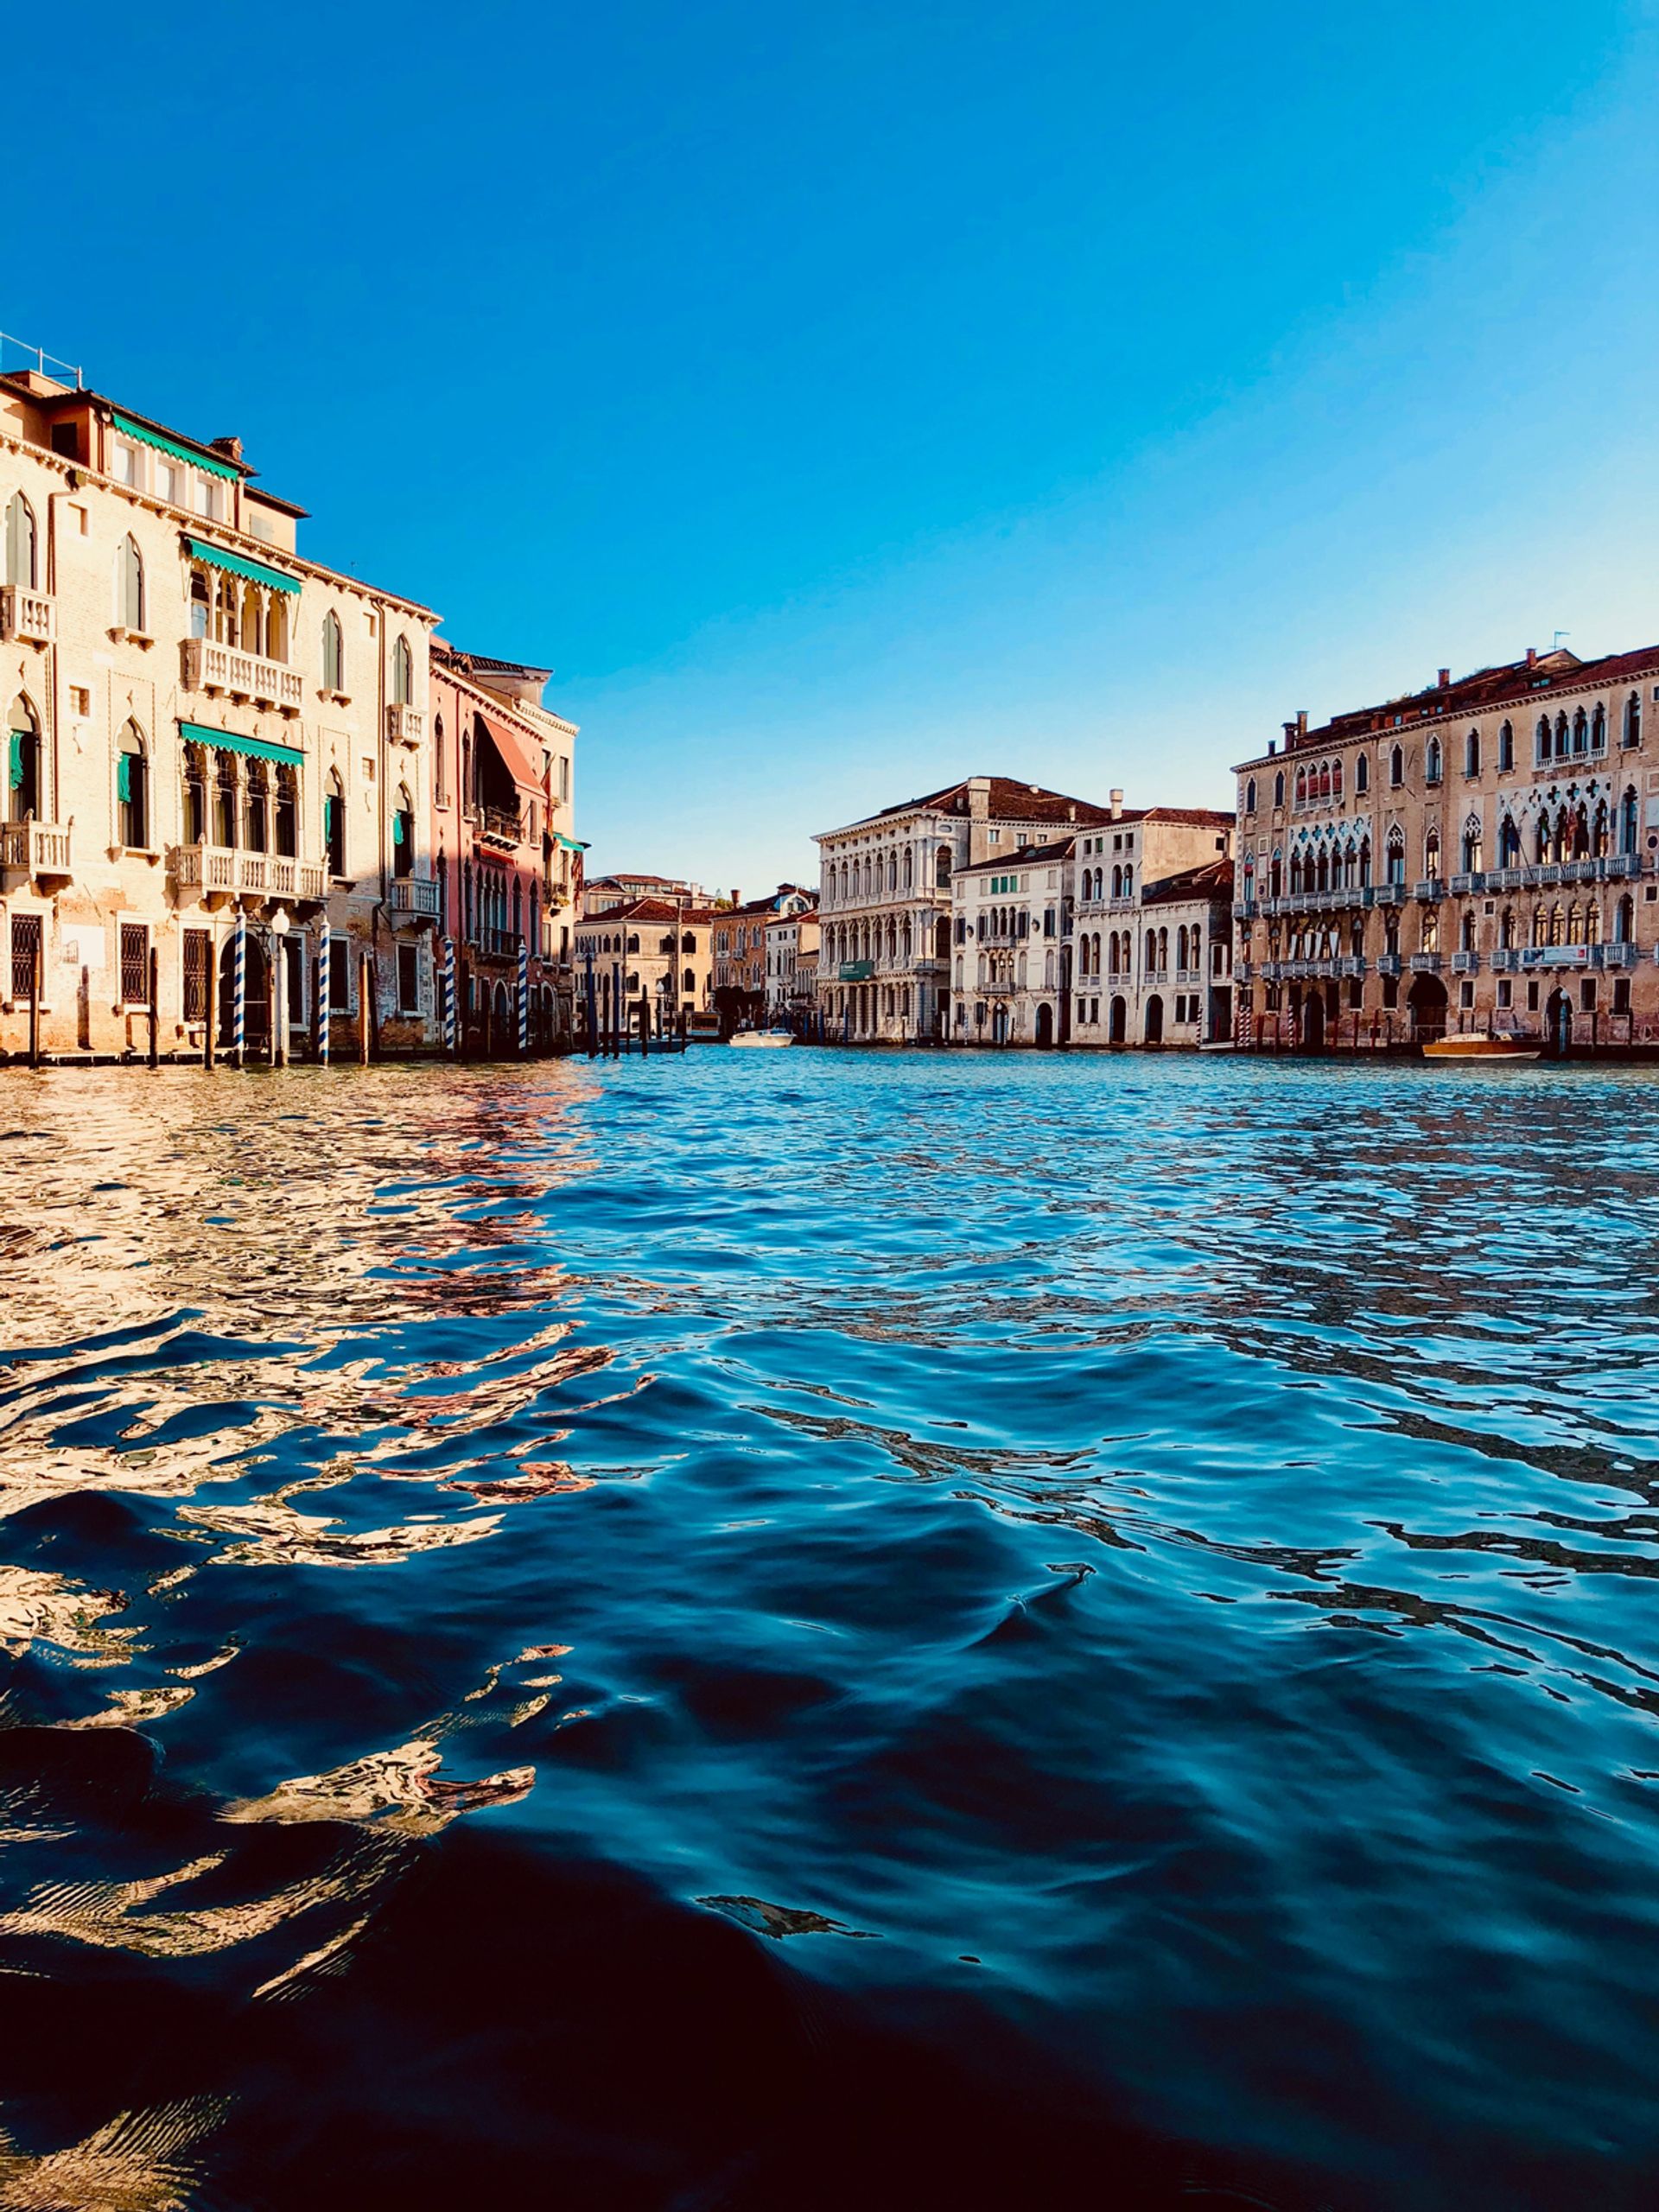 For Venice to be protected from sea-level rise, culture, science, political and economic power need to collaborate on a long-term strategy © Rafael Kellermann Streit